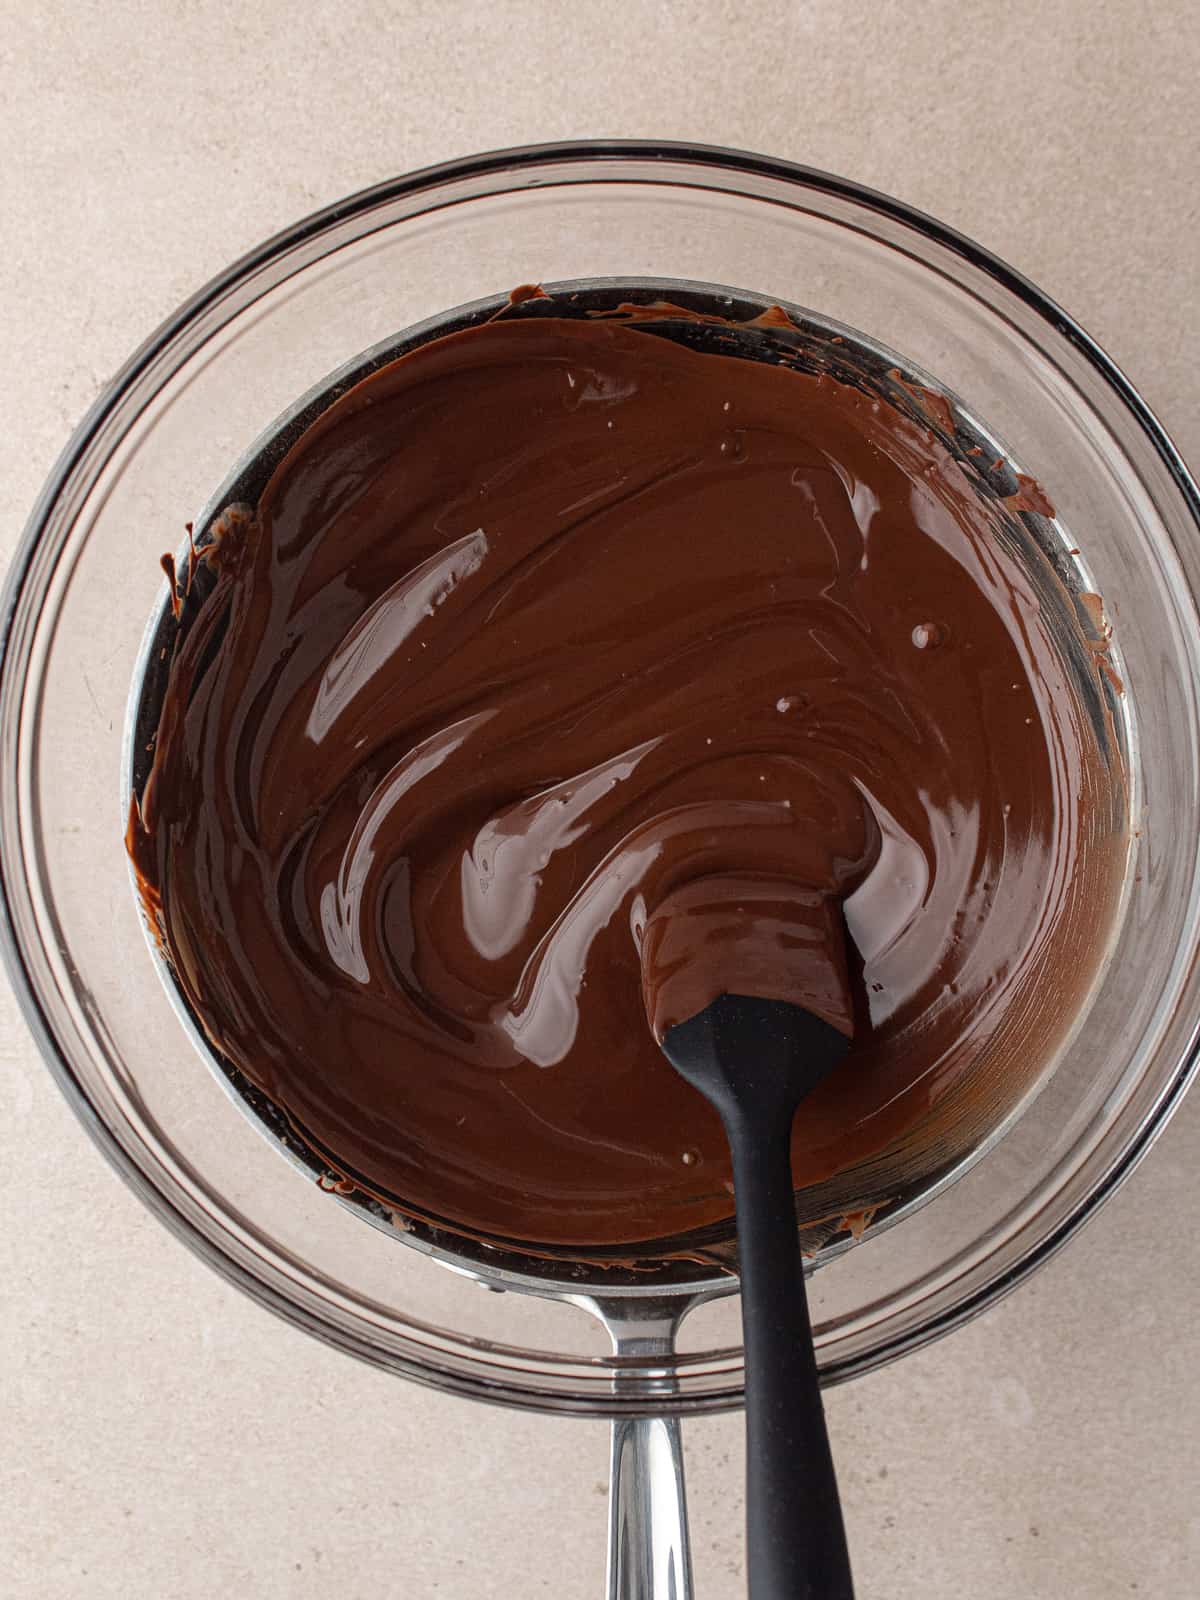 Melted chocolate over a double boiler.